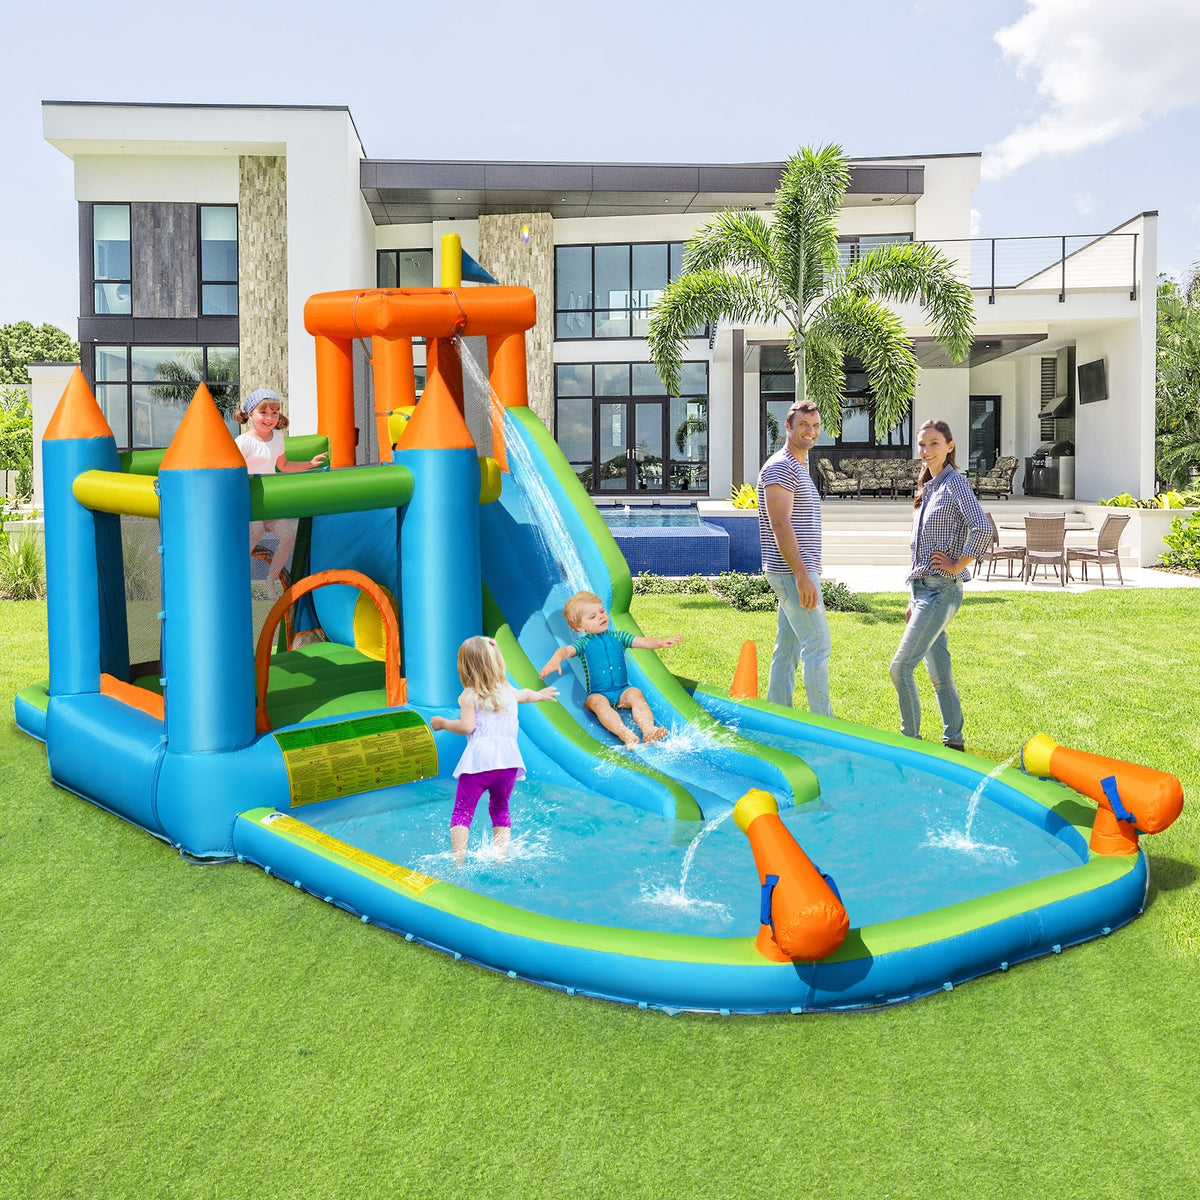 Inflatable Water Slide with Bounce House and Splash Pool without Blower